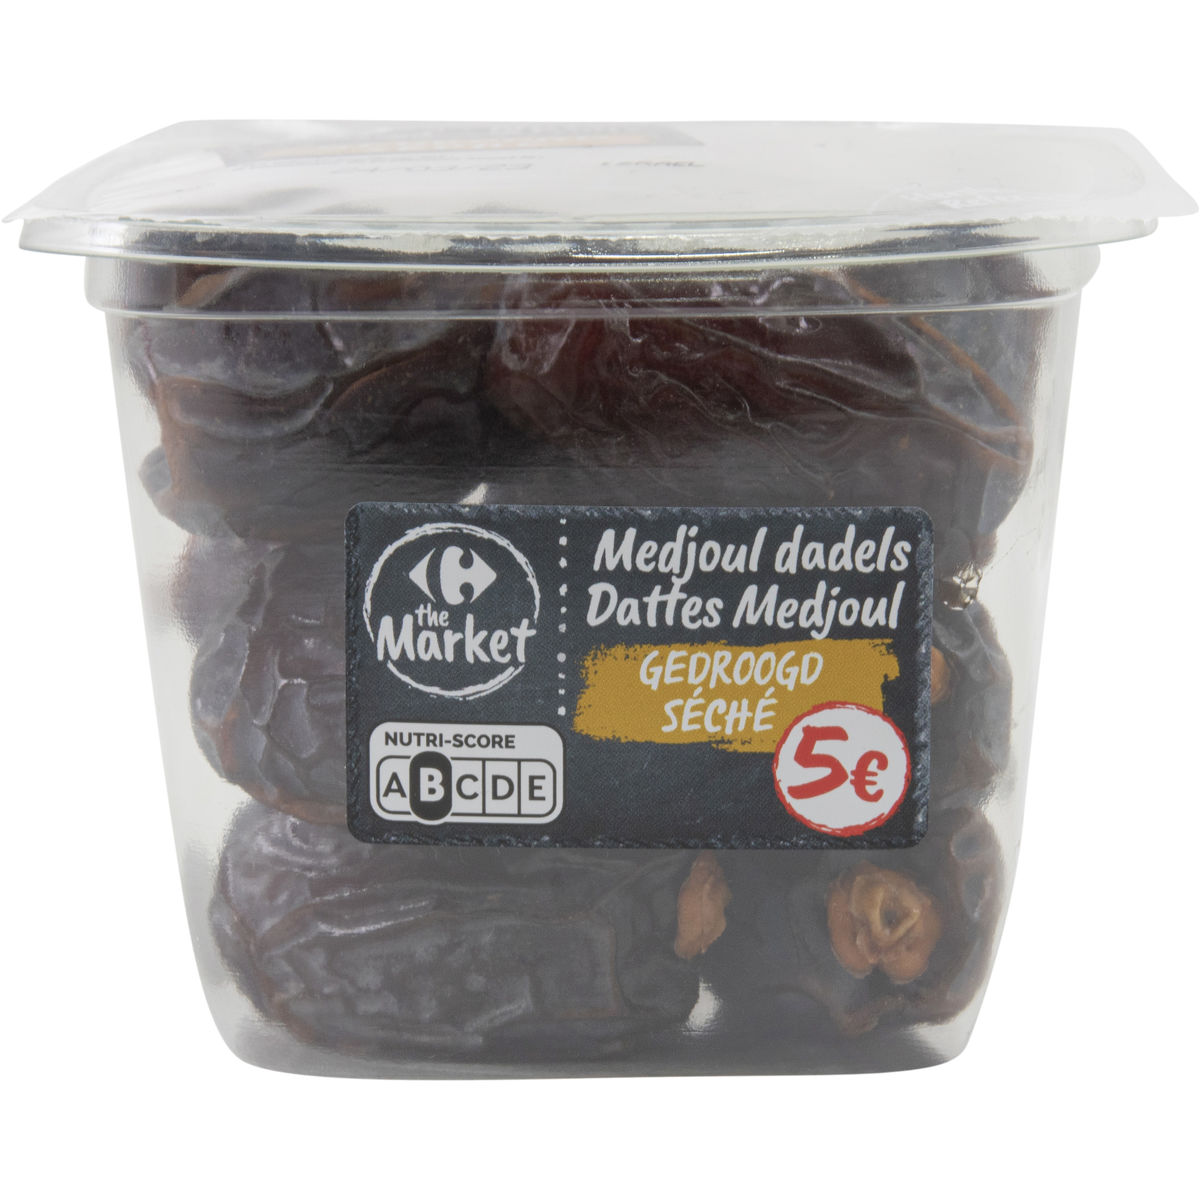 Carrefour The Market Nuts & Fruits Medjoul Dadels Gedroogd 250 g